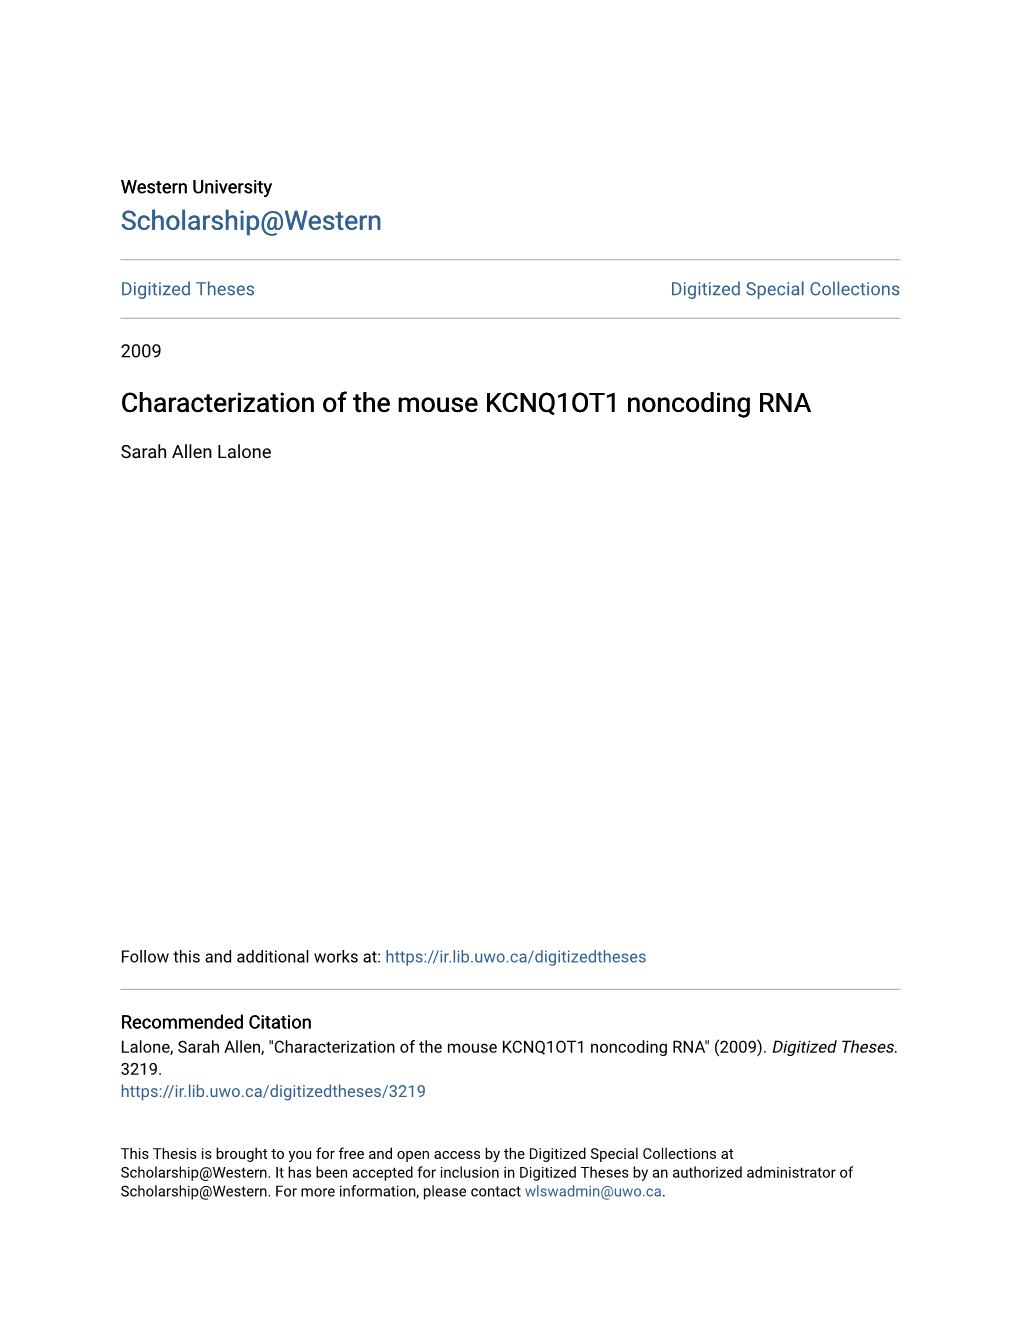 Characterization of the Mouse KCNQ1OT1 Noncoding RNA